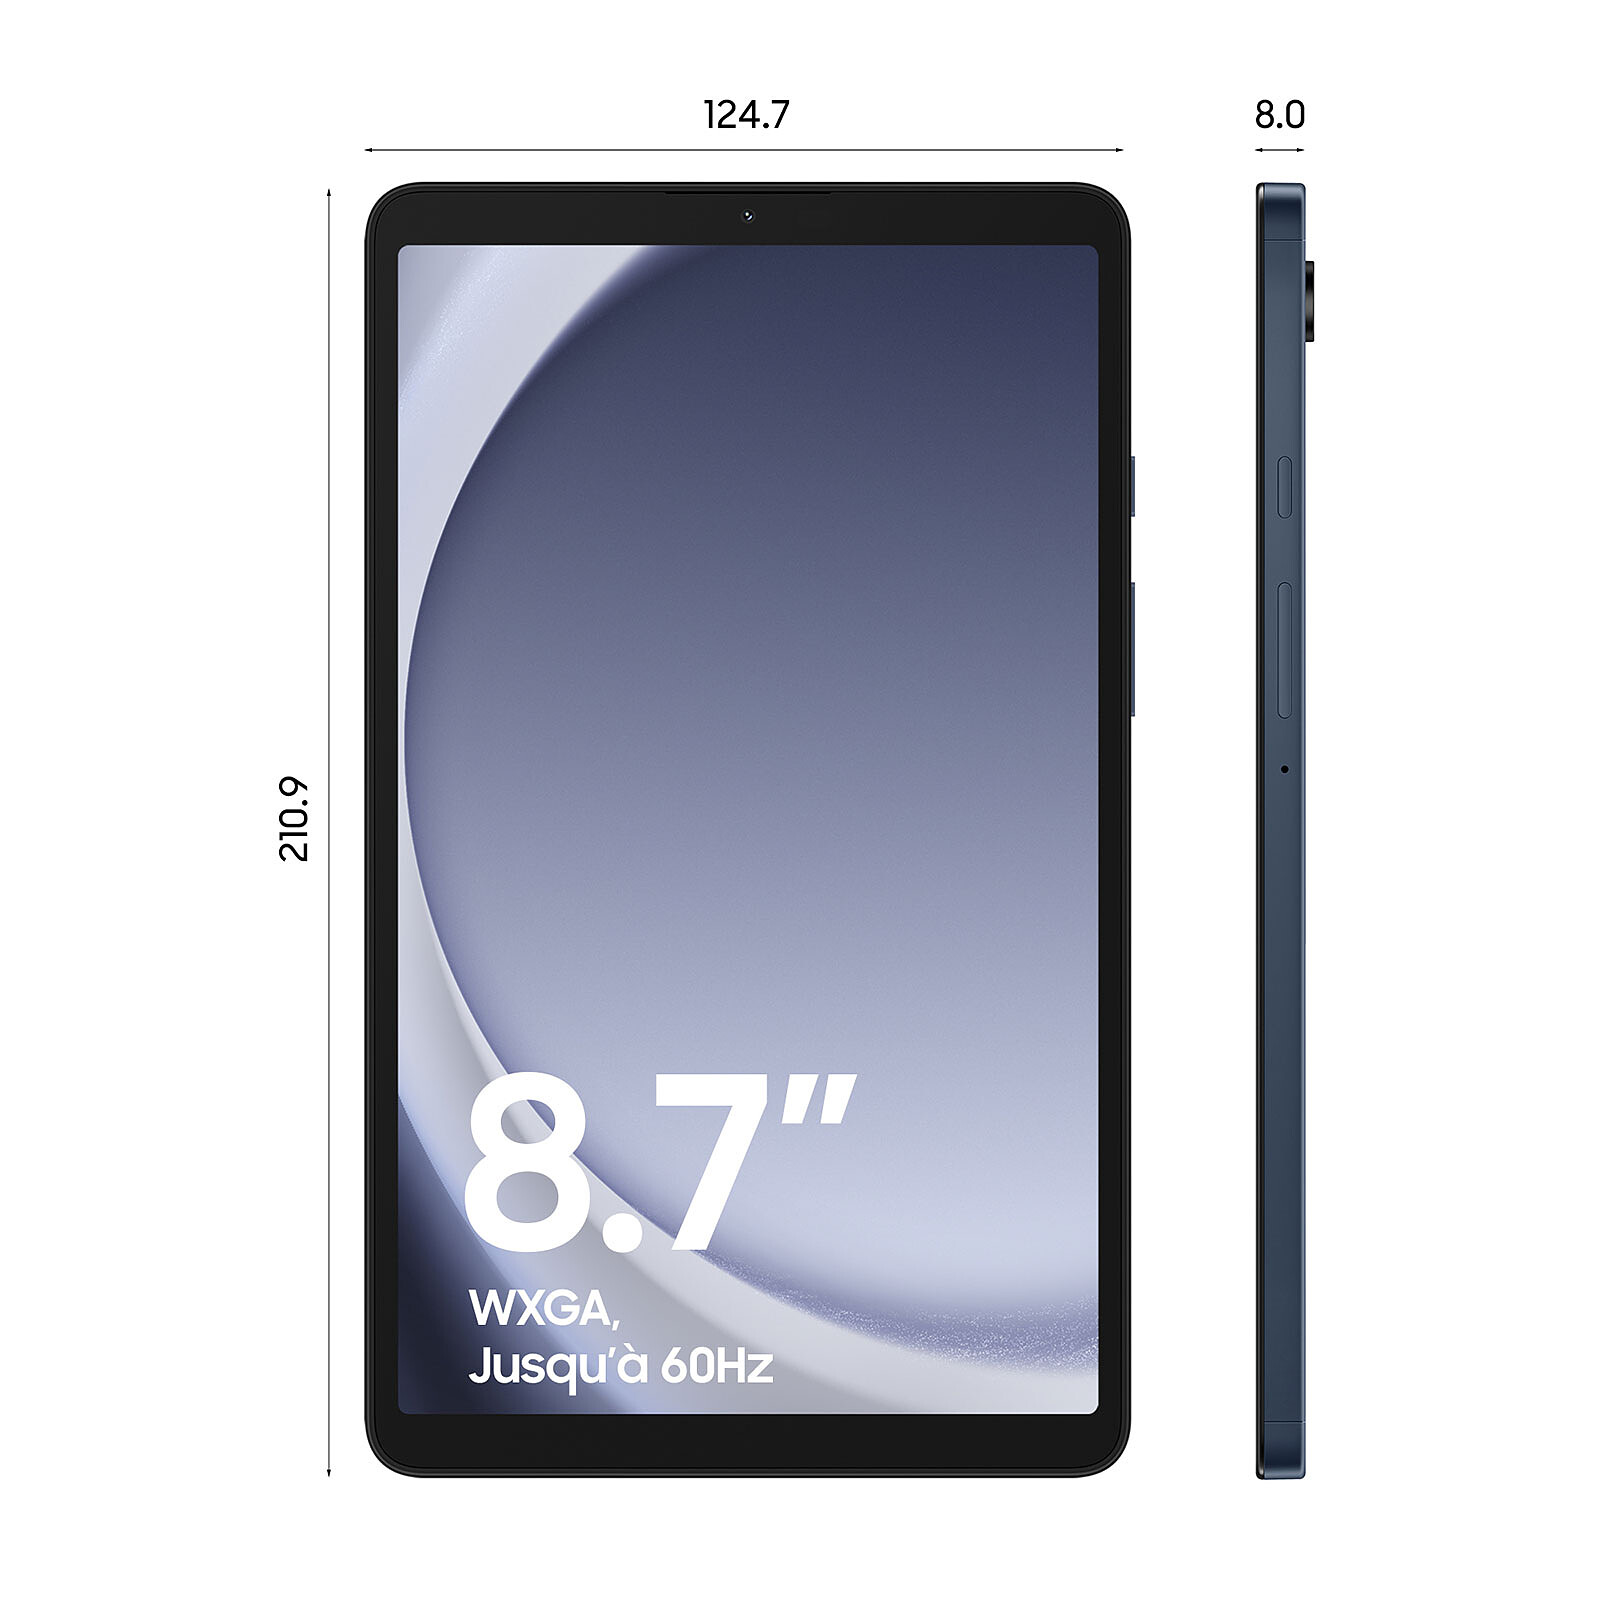 Samsung Galaxy Tab S9 11 SM-X710 128 Go Anthracite Wi-Fi - Tablette  tactile - Garantie 3 ans LDLC